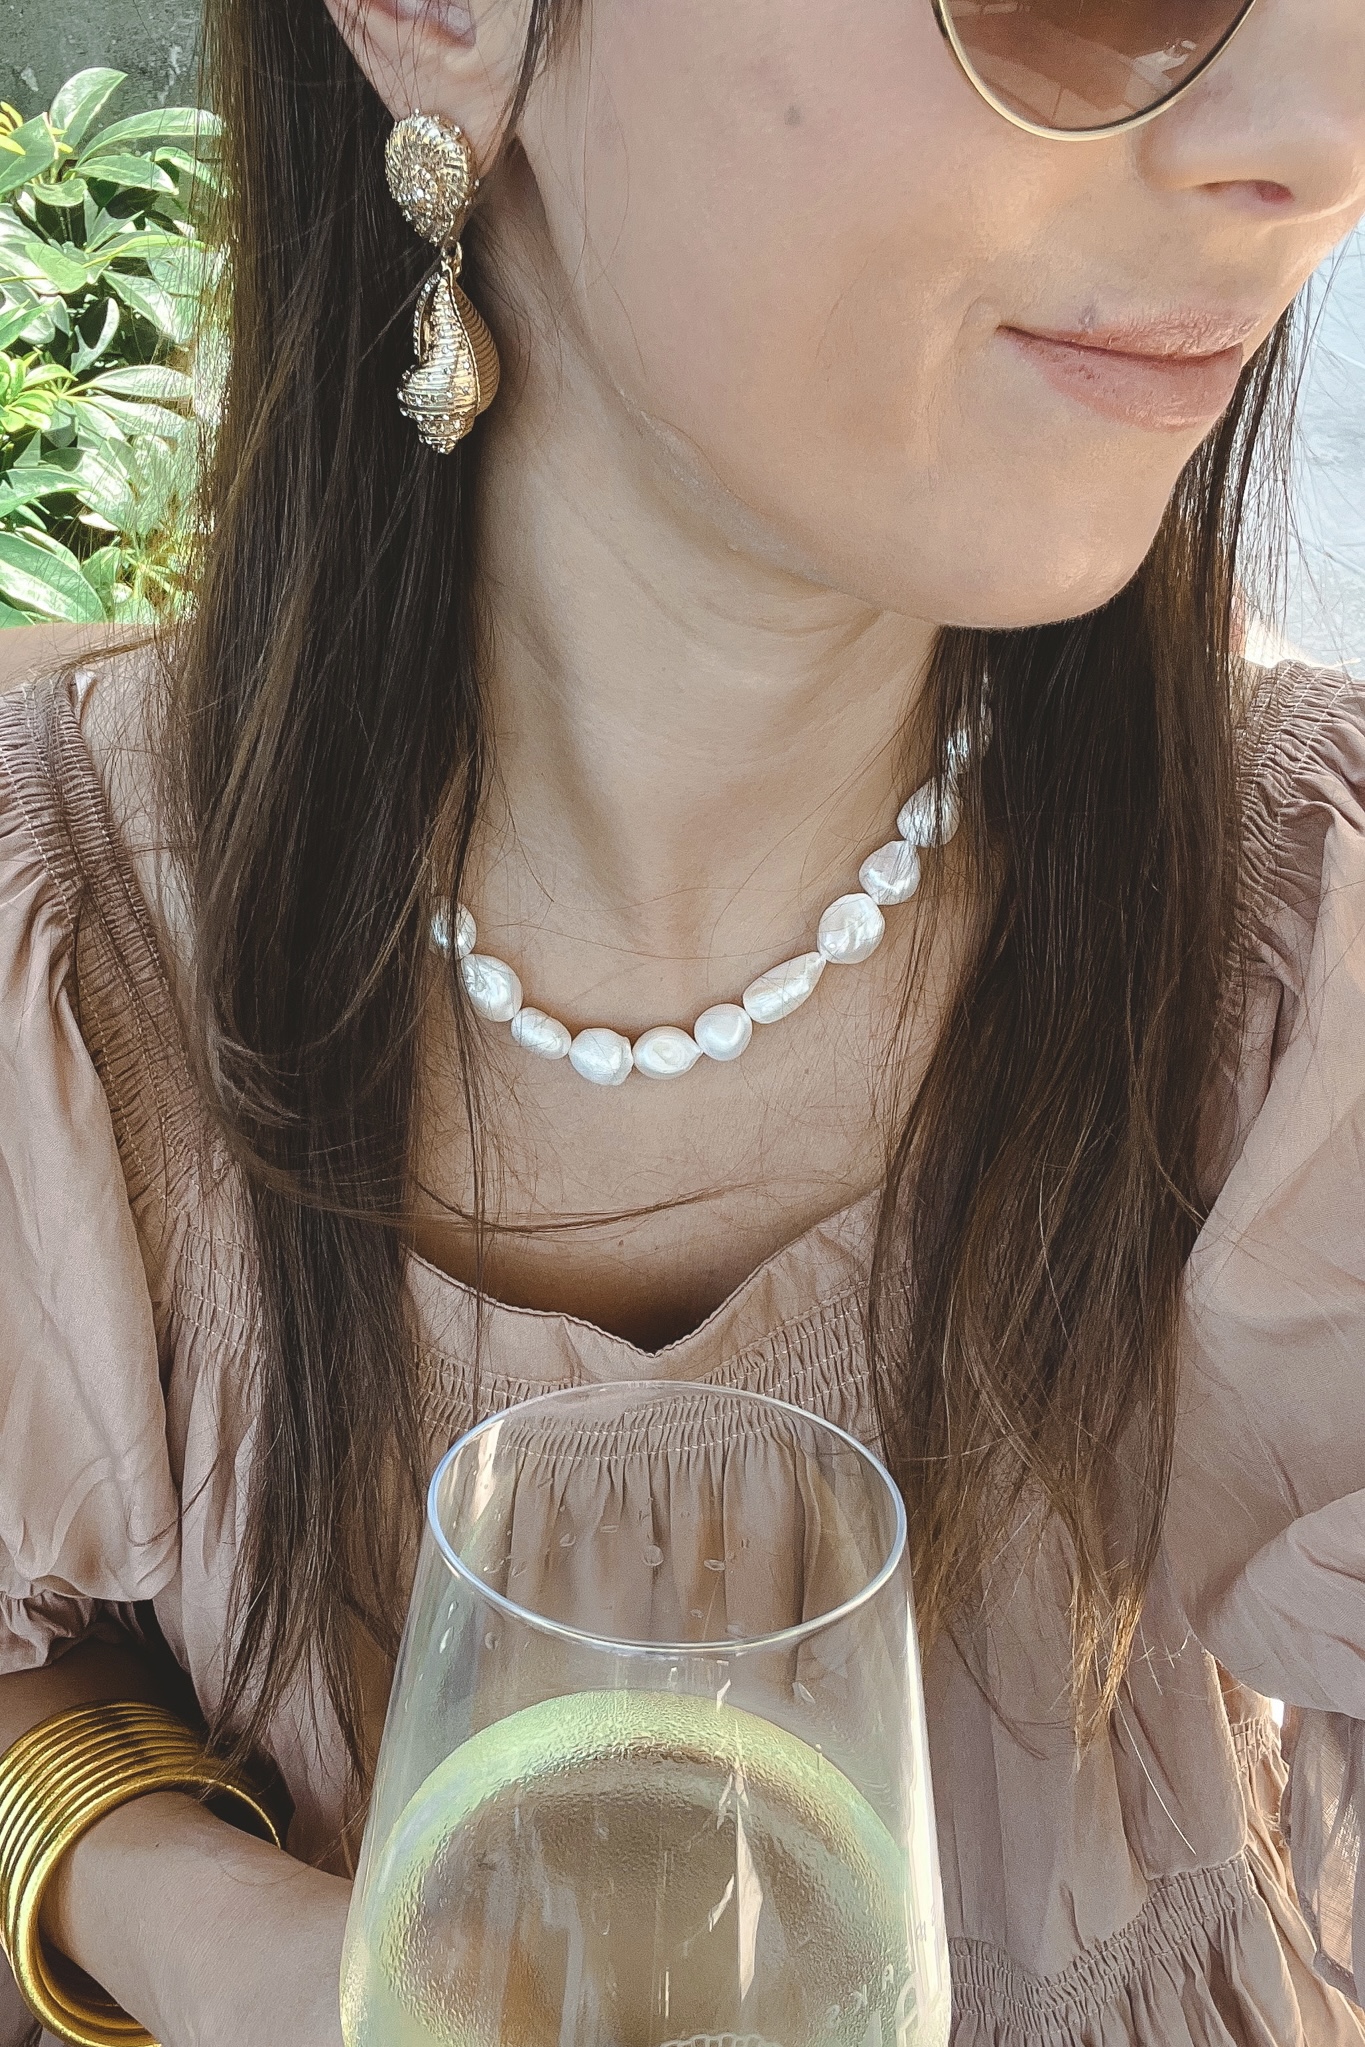 baublebar corsica earrings and pearl necklace